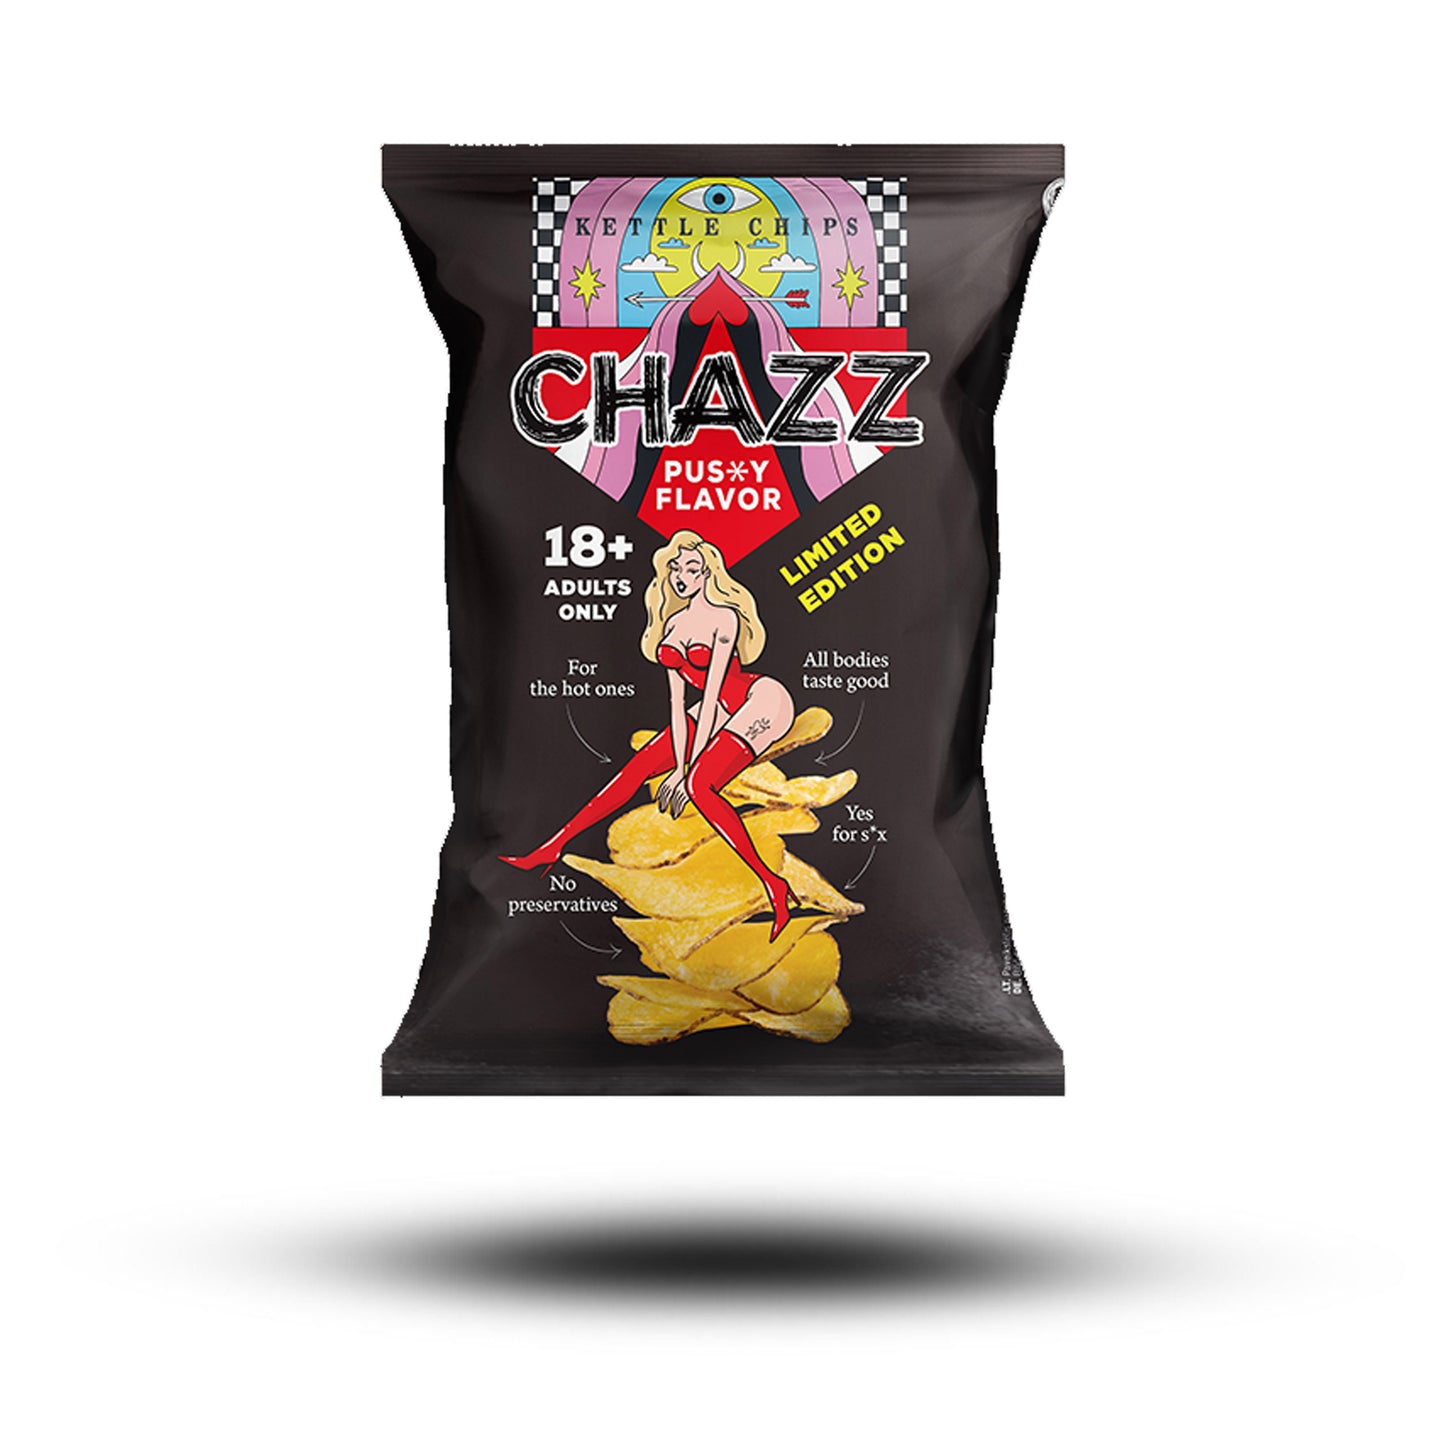 Chazz 18+ Potato Chips 90g LIMITED EDITION